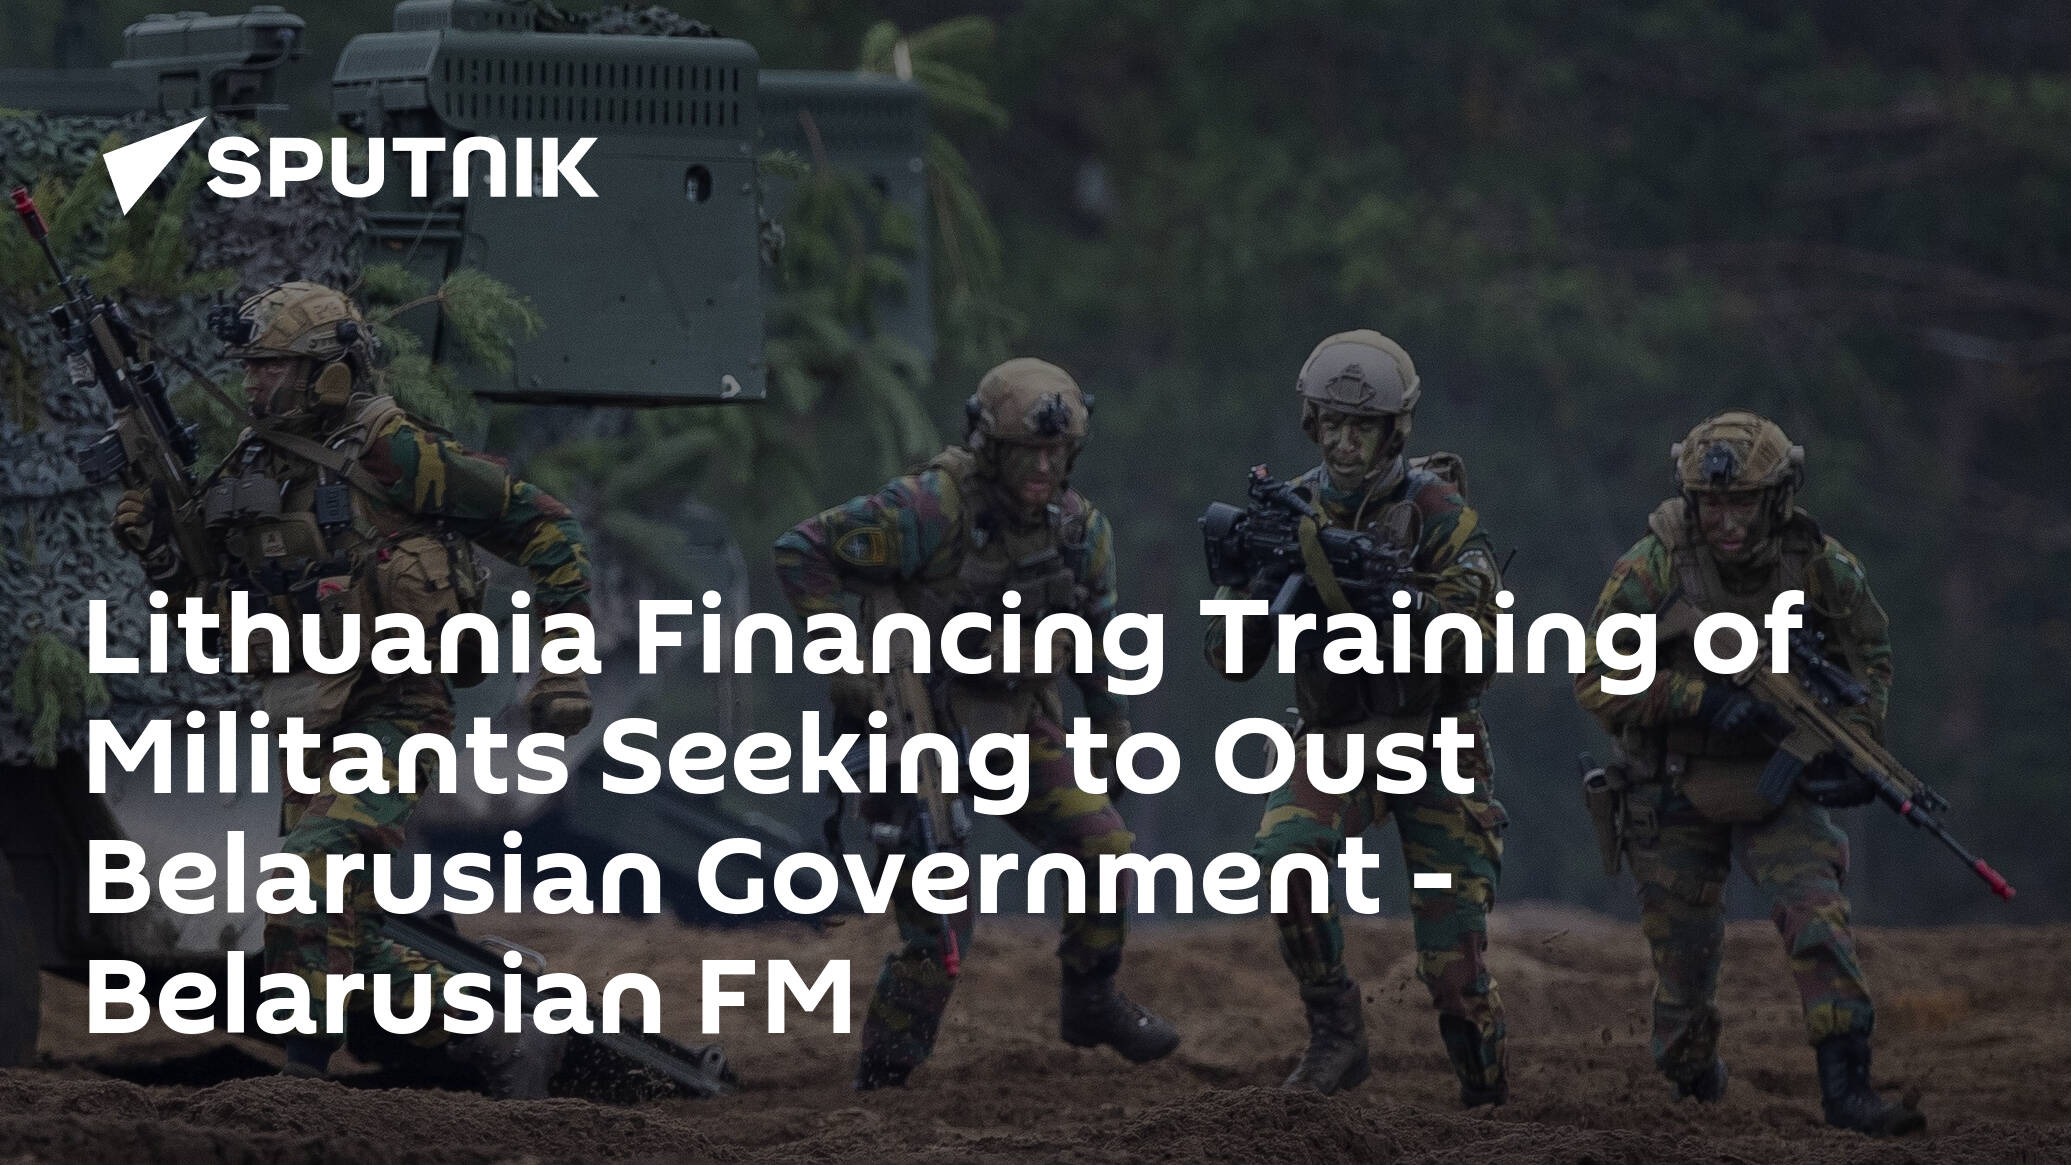 Lithuania Financing Training of Militants Seeking to Oust Belarusian Government – Belarusian FM